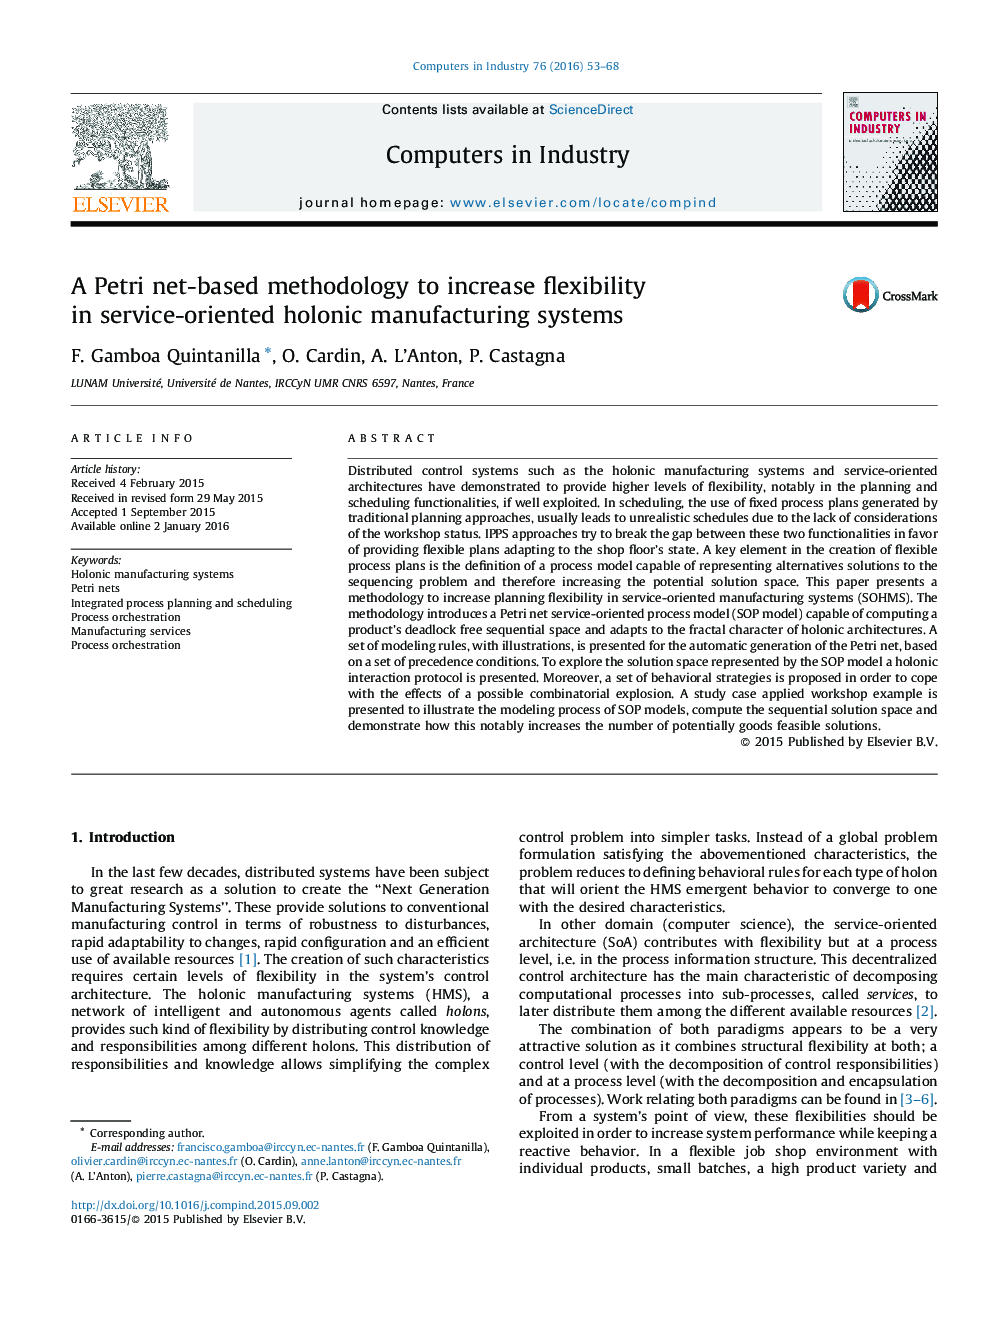 A Petri net-based methodology to increase flexibility in service-oriented holonic manufacturing systems